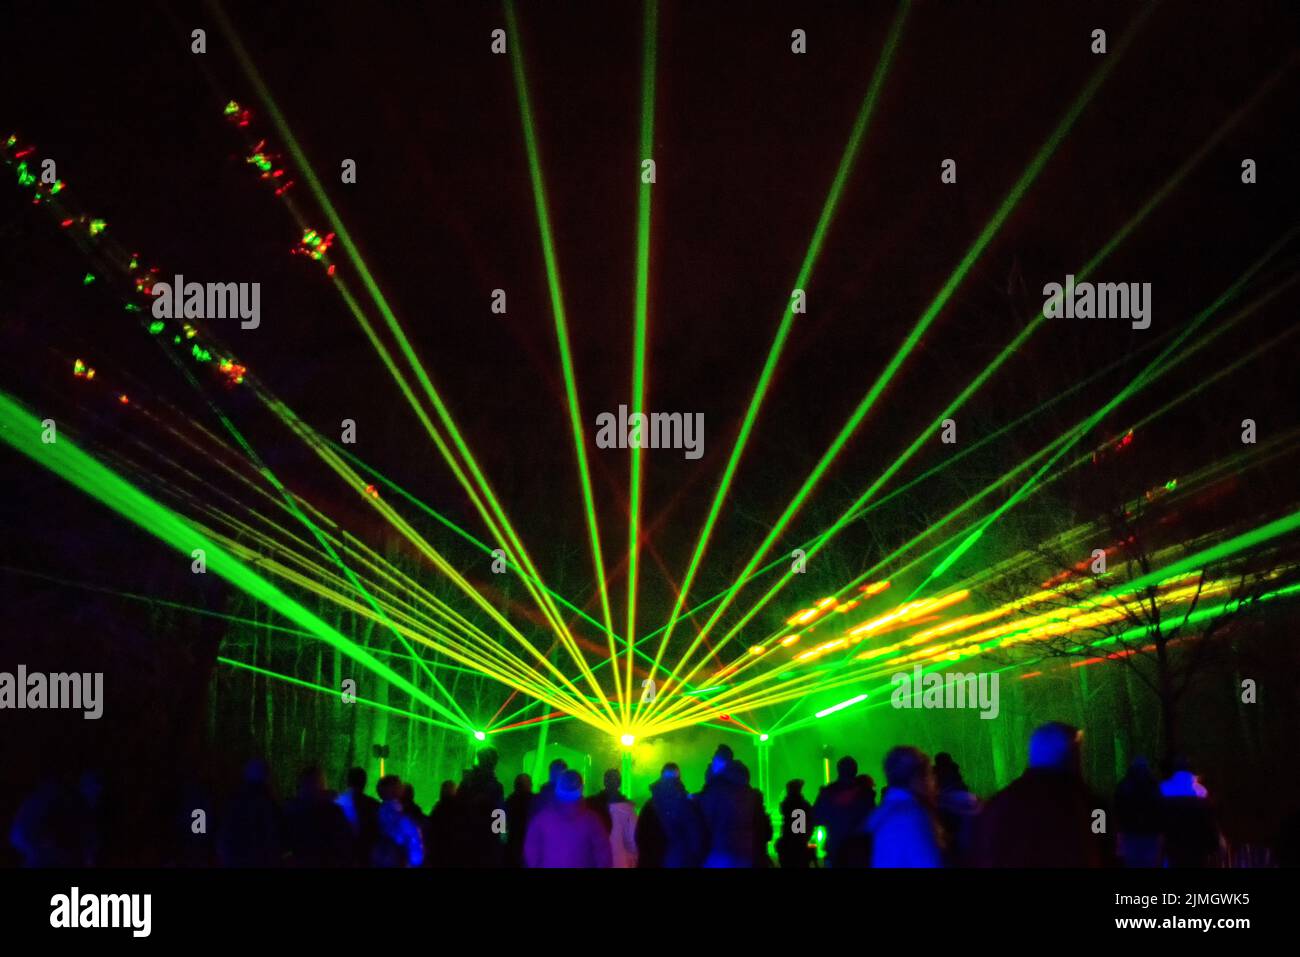 Green and red laser beams on a black background Stock Photo